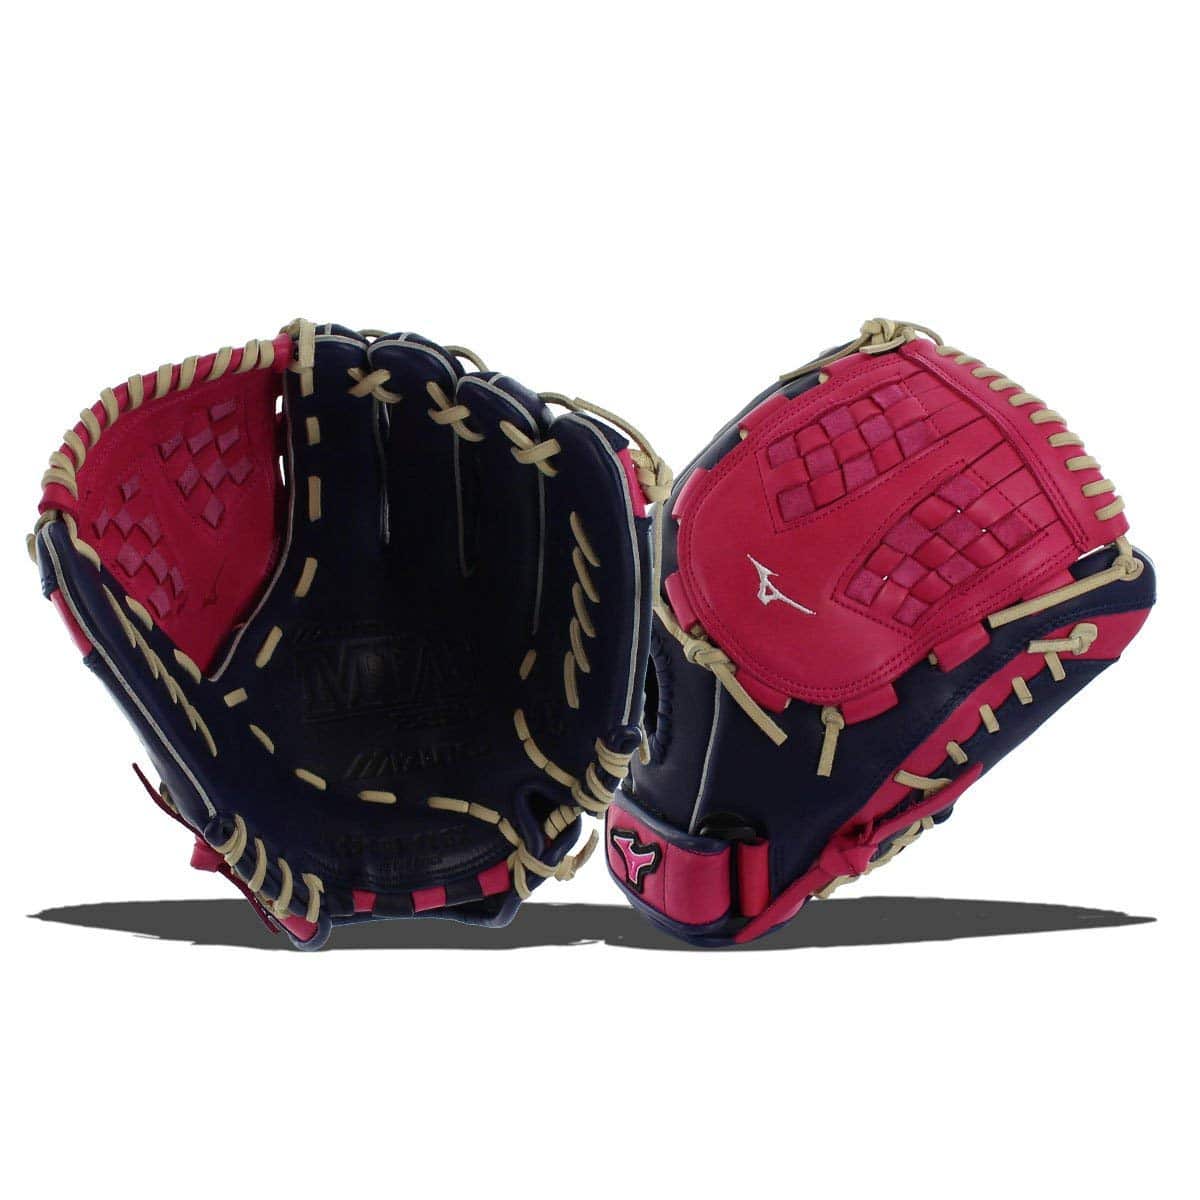 What are the Best Fastpitch Softball Gloves? Softball Ace